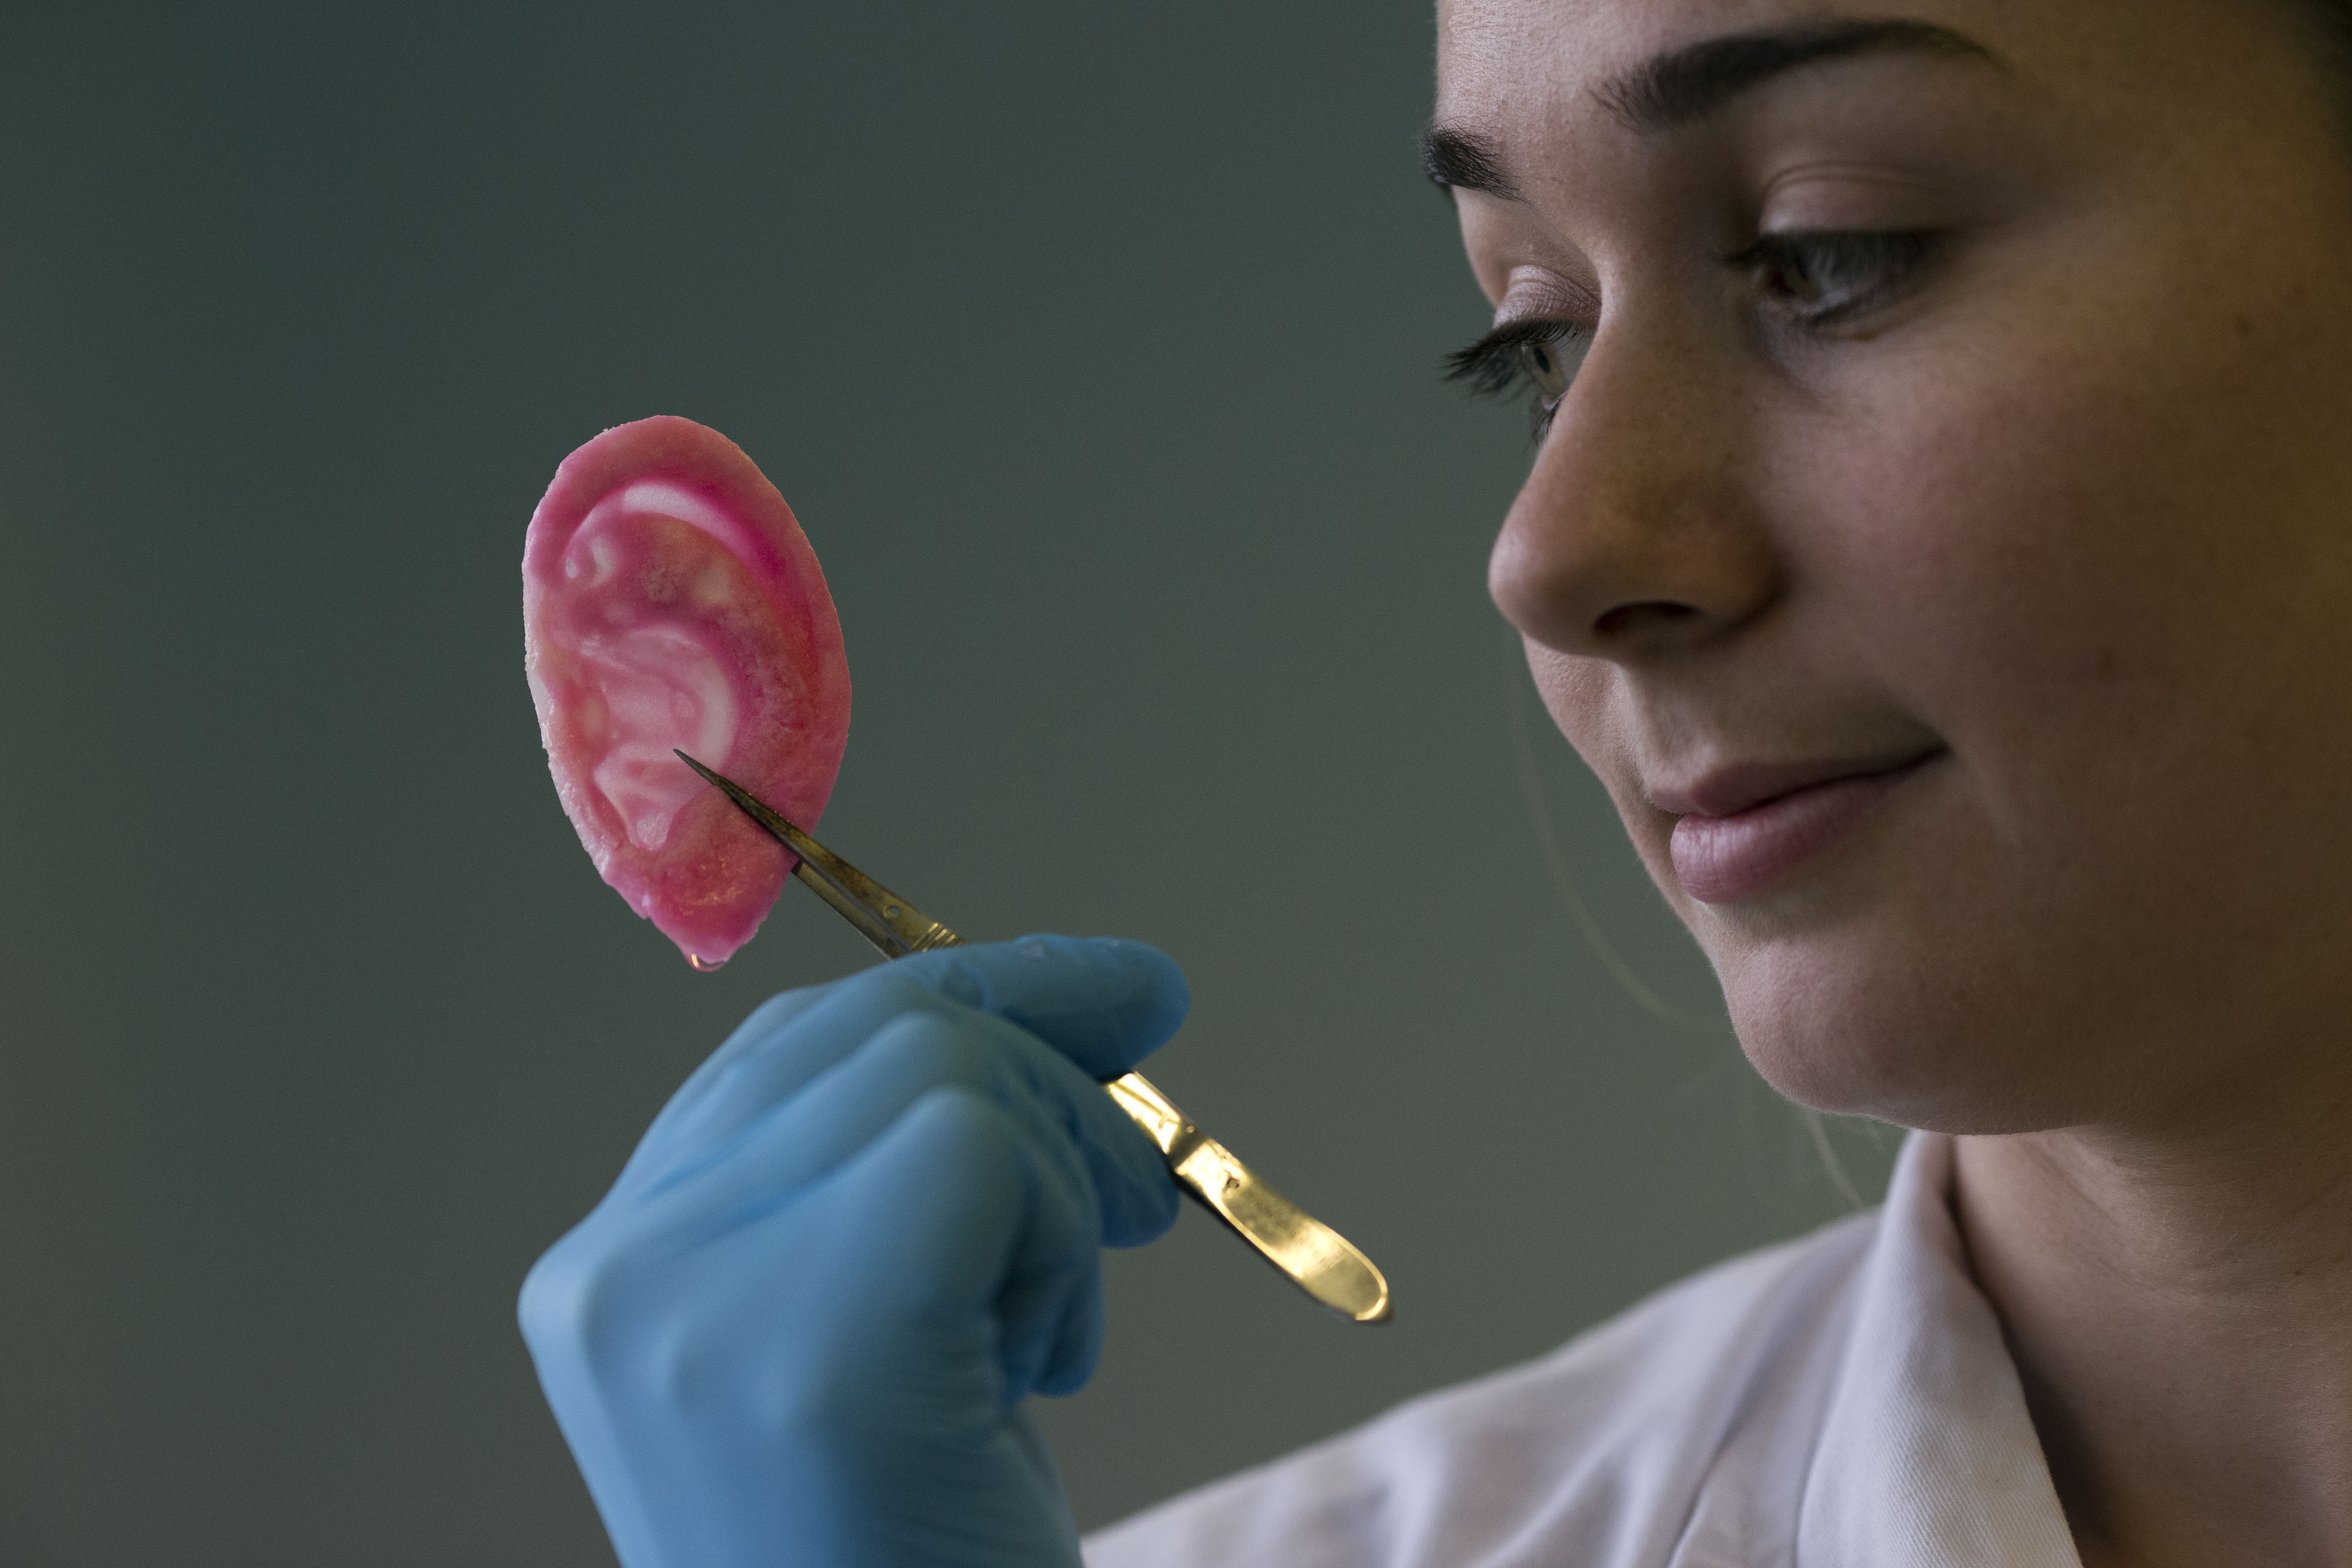 Royal Free Hospital - London scientists grow noses and ears - Pictures - CBS News5184 x 3456